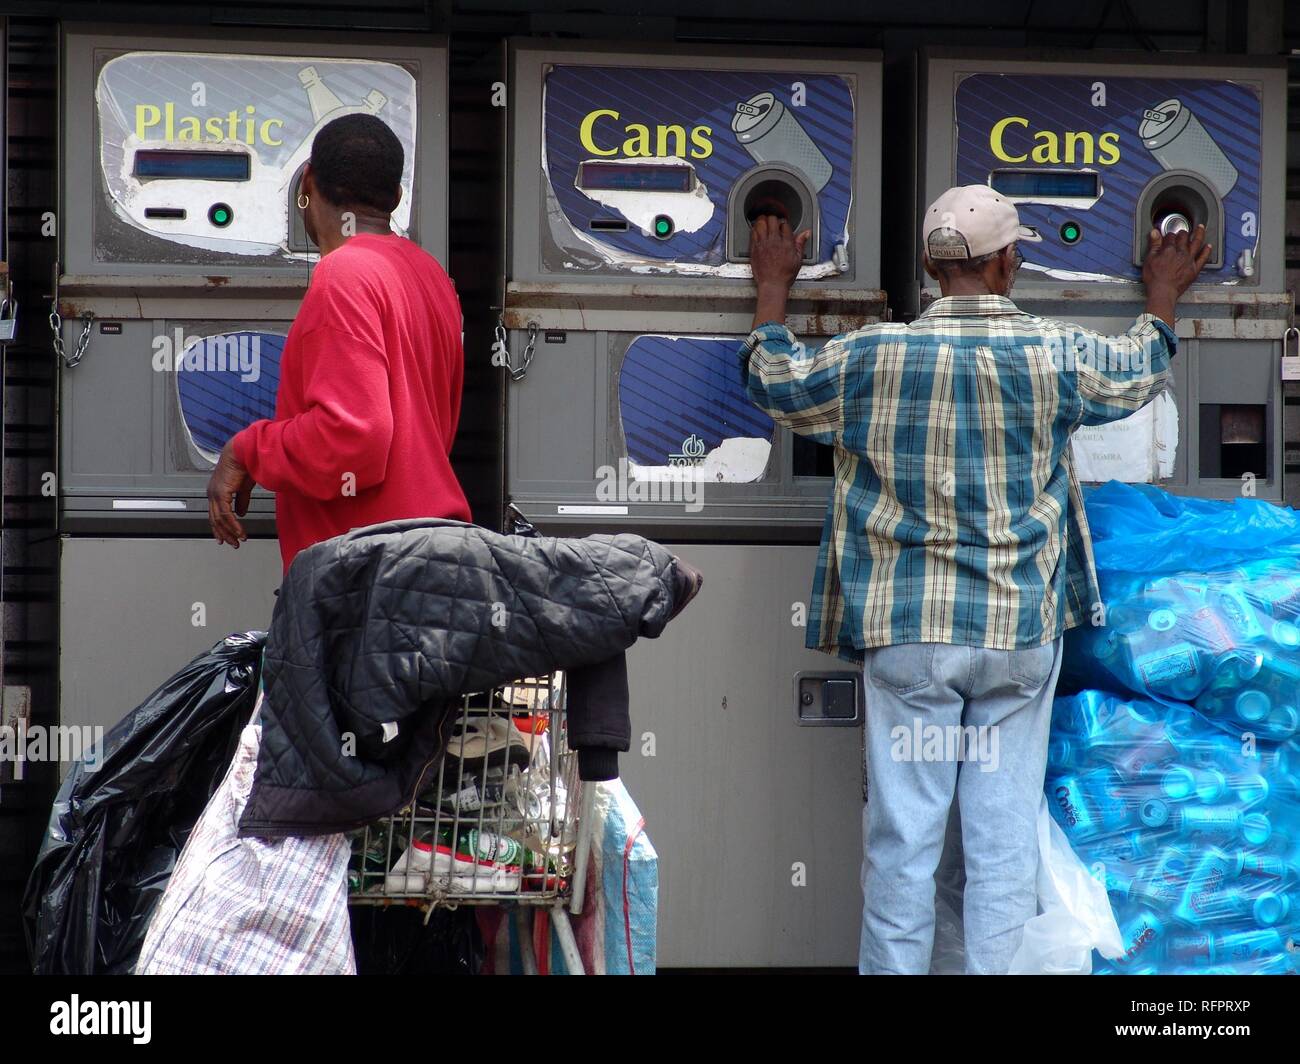 USA, United States of America, New York City: Harlem, 125th Street, Refund mashines for cans and bottles, collected by people. Stock Photo